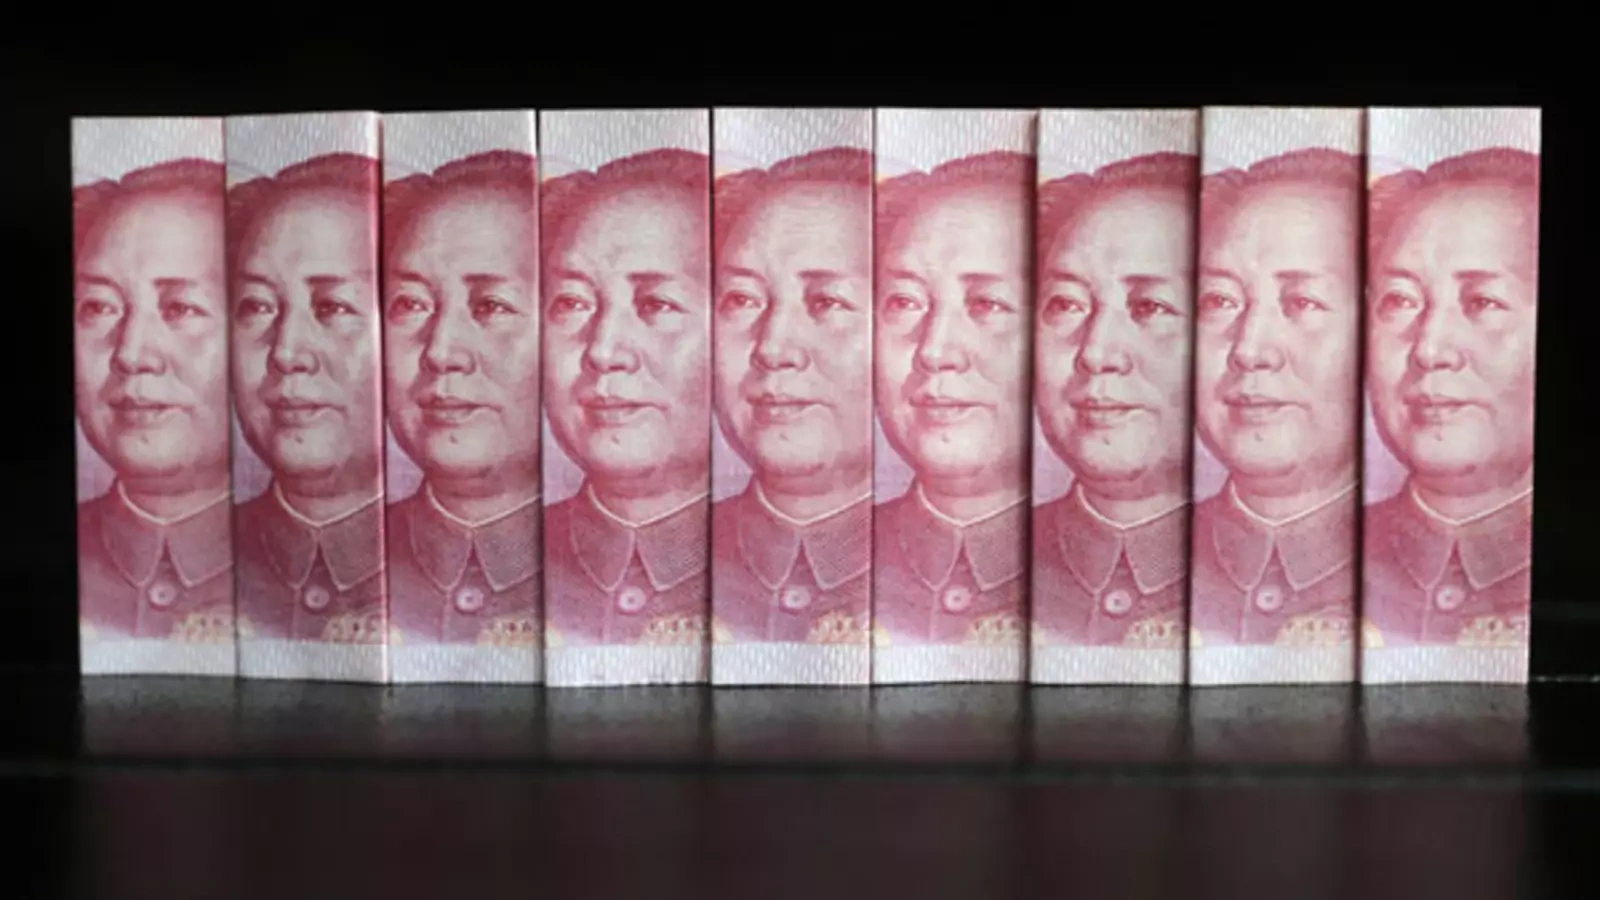 Chinese 100 yuan banknotes are stacked side by side.